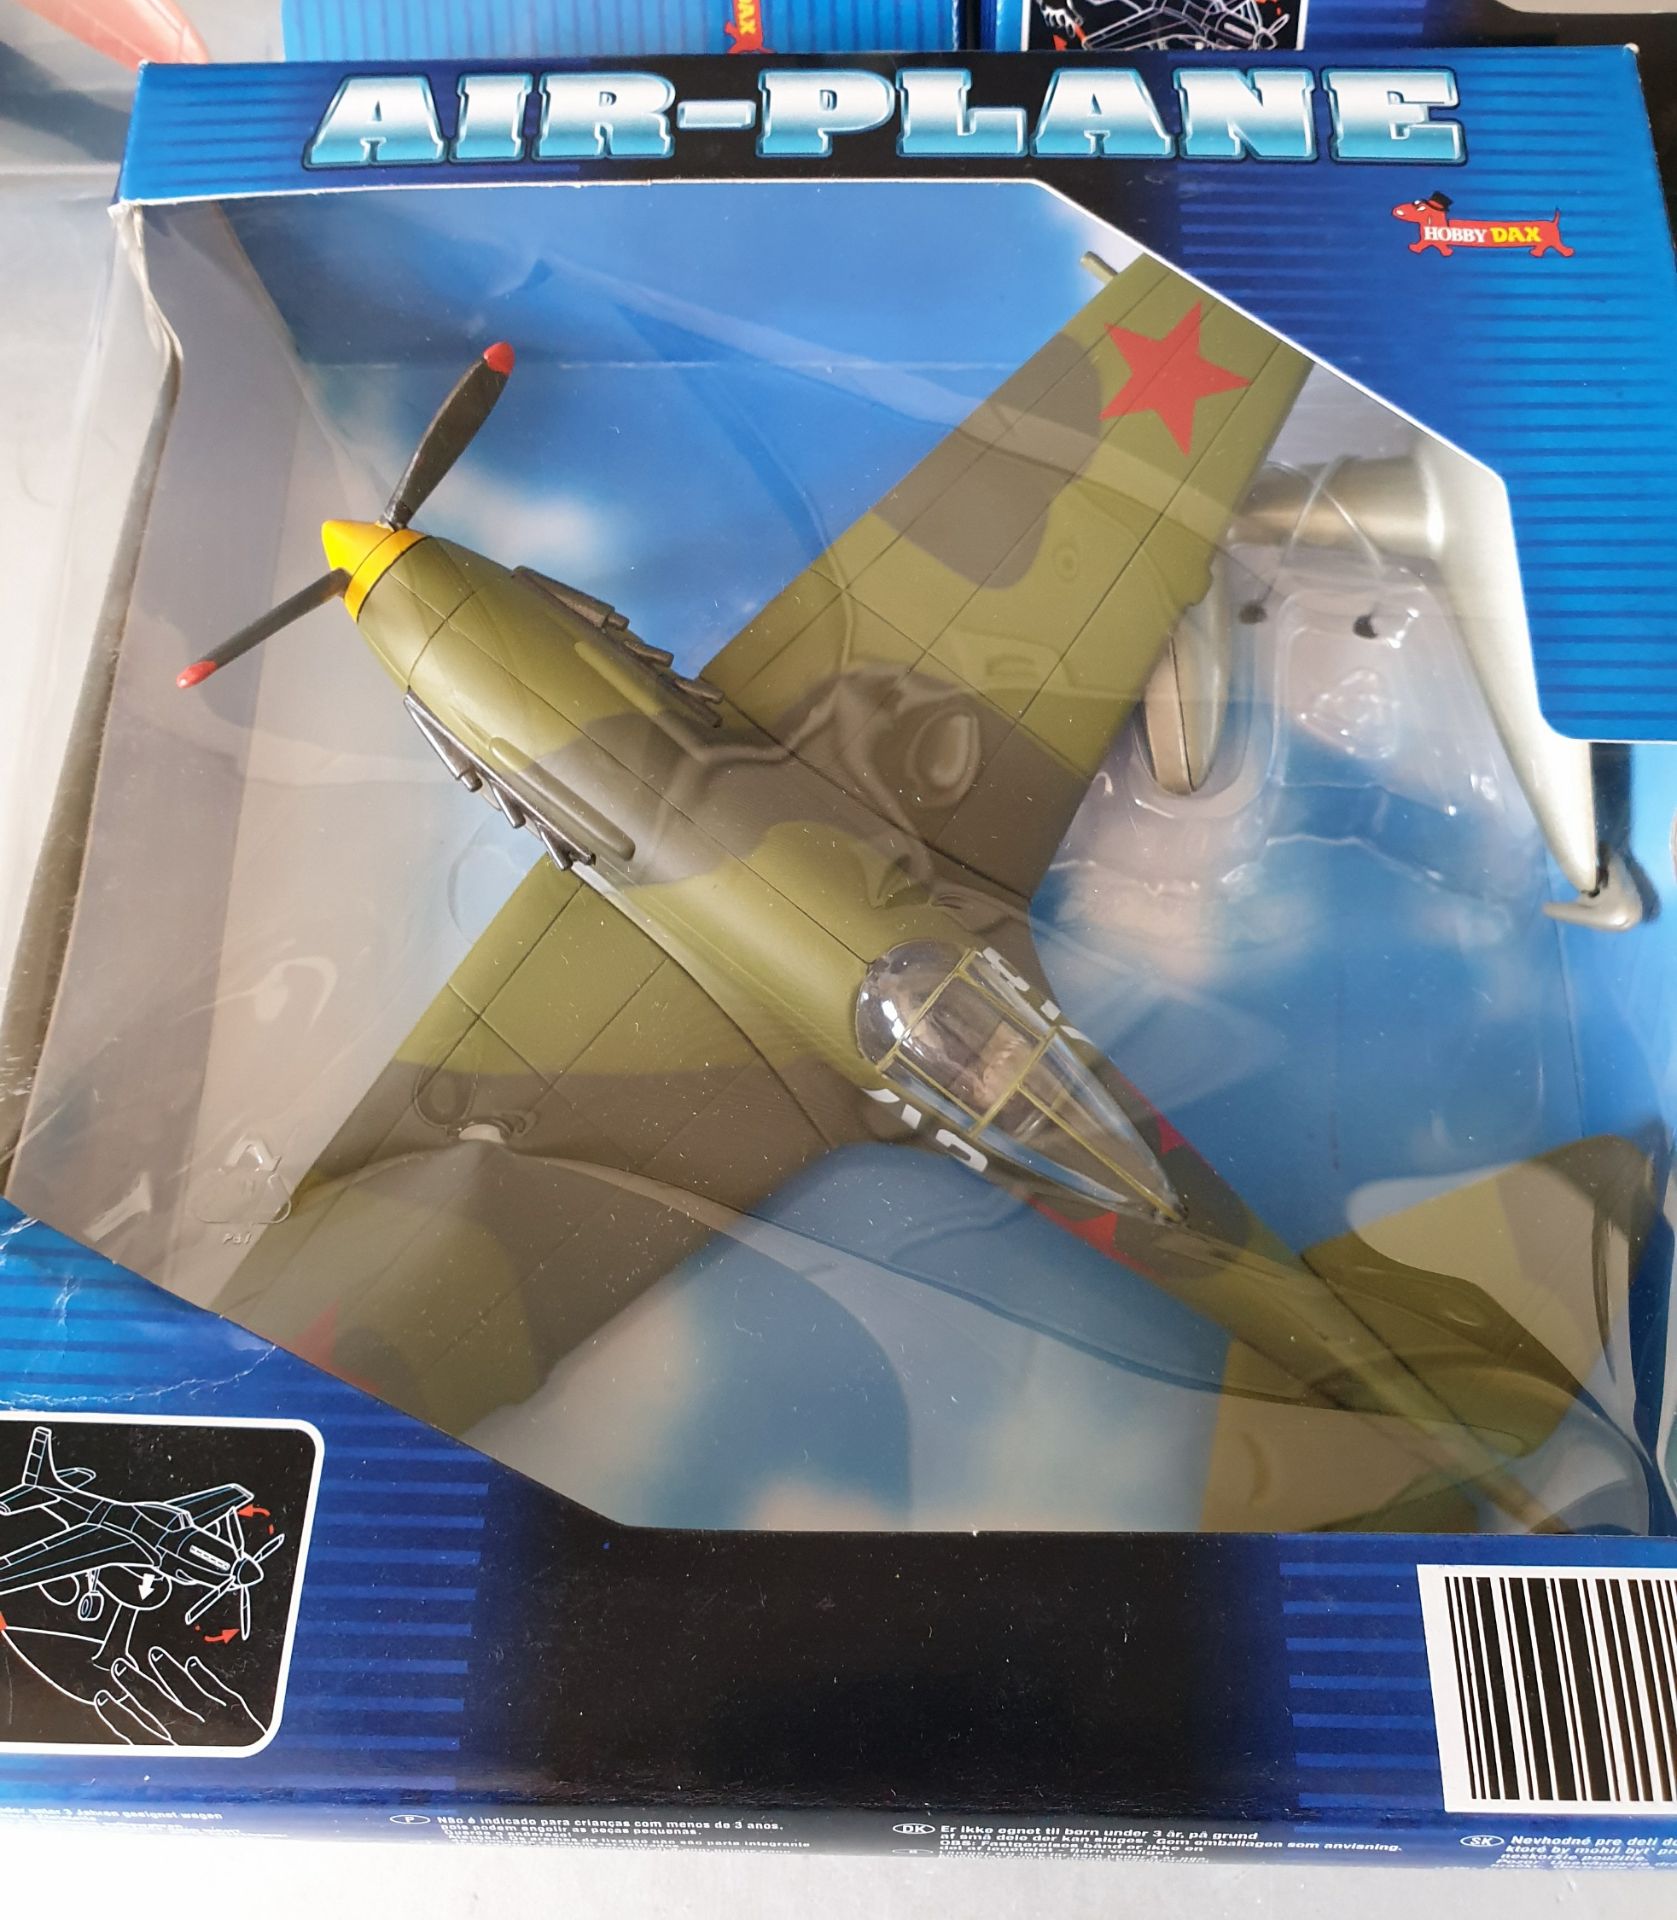 Vintage Collectable 3 x Hobby Dax Die Cast WWII Military Air Plane. Part of a recent Estate - Image 2 of 2